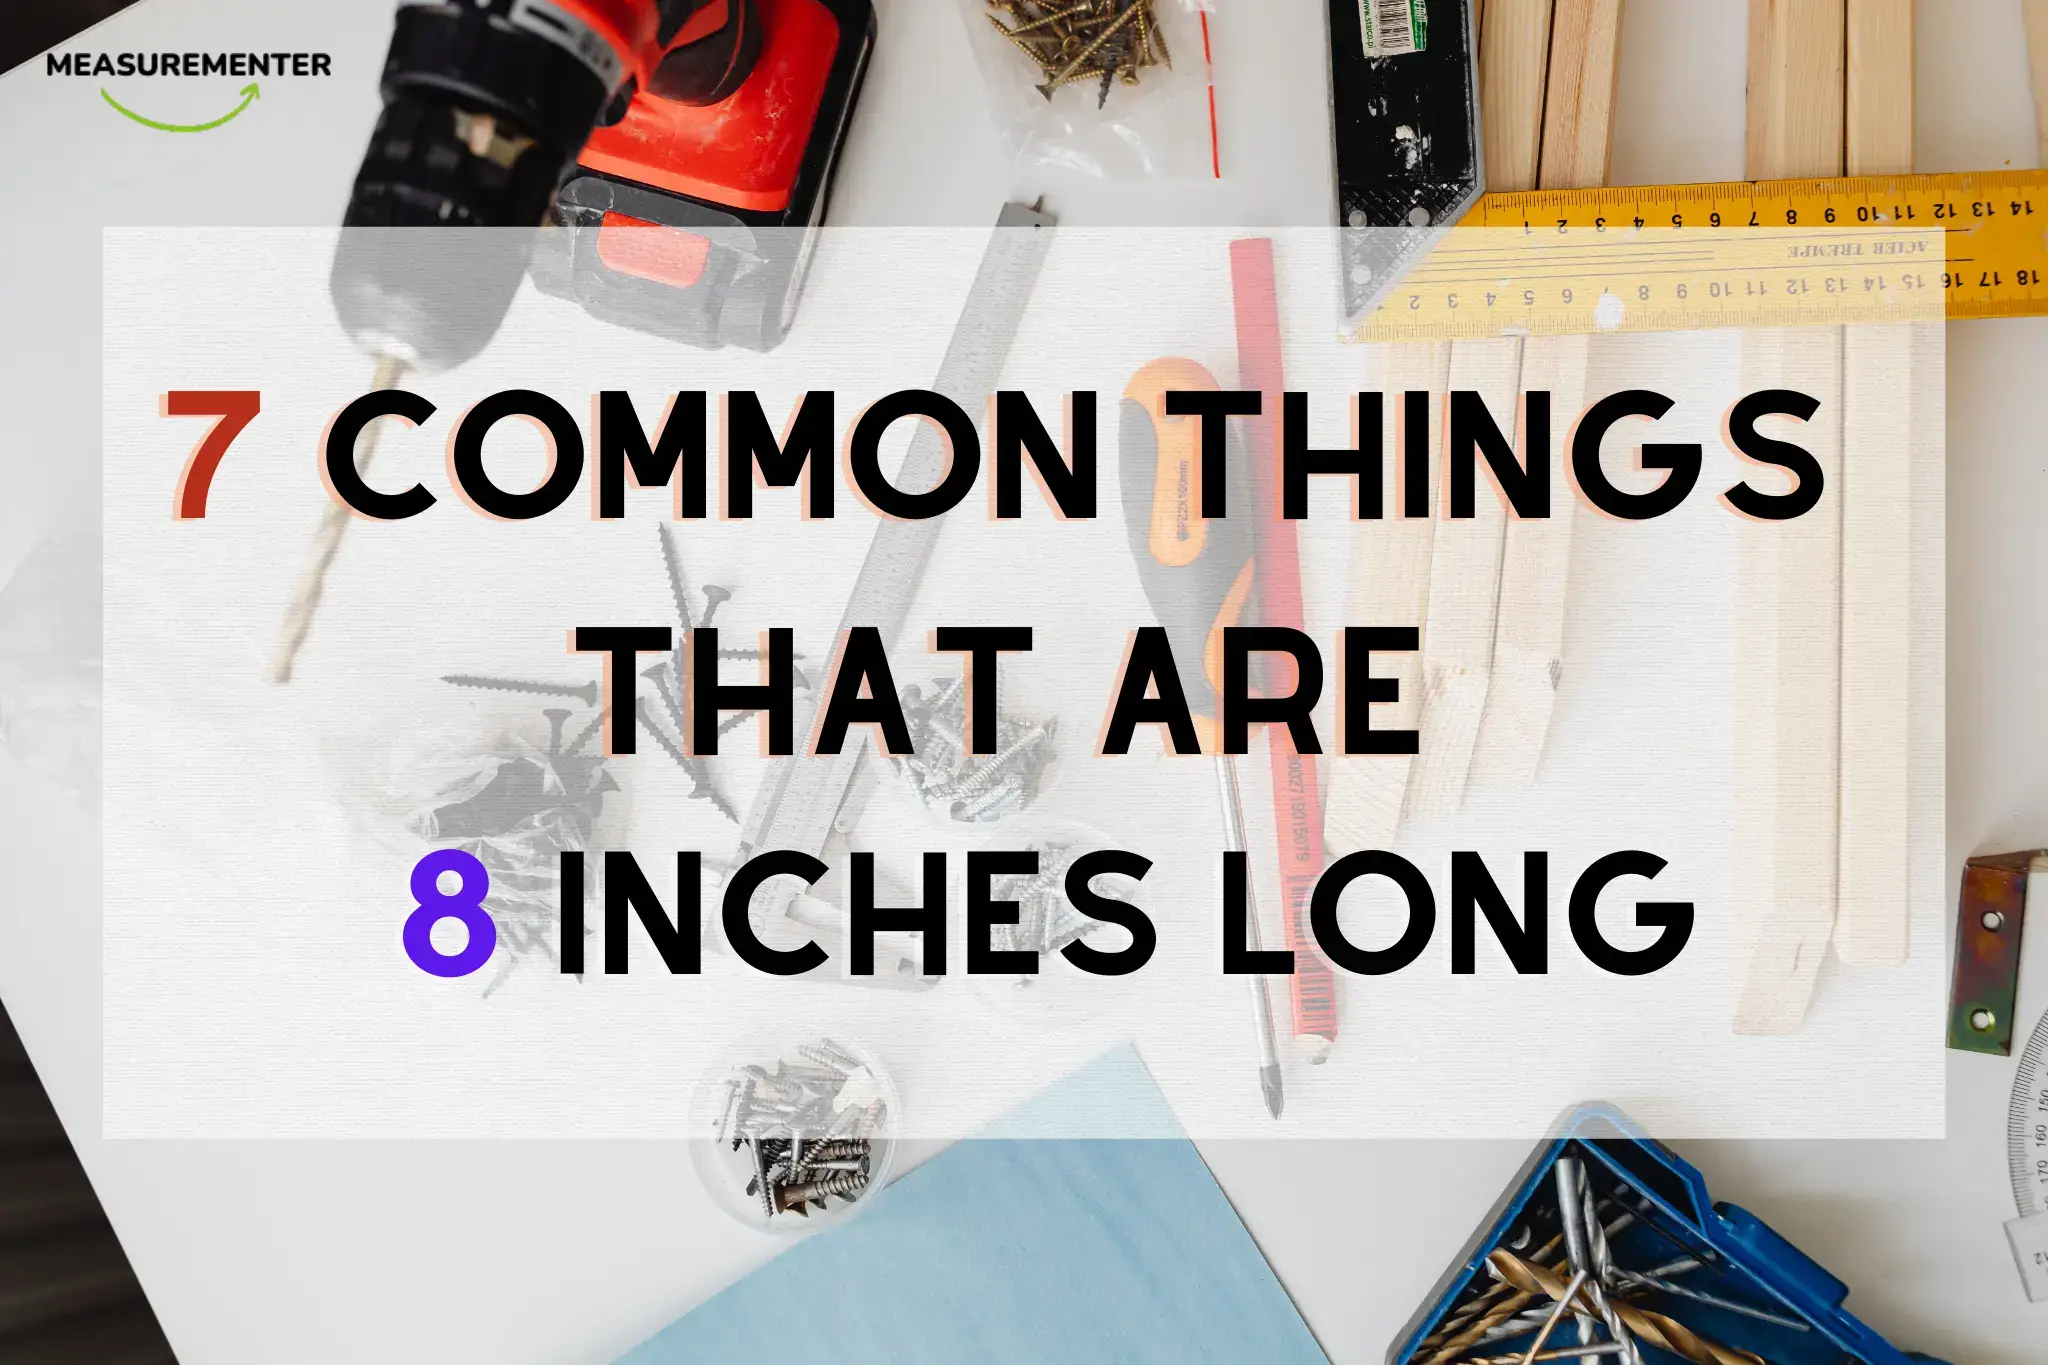 7 Common things that are 8 inches long. How long is 7 Inches?